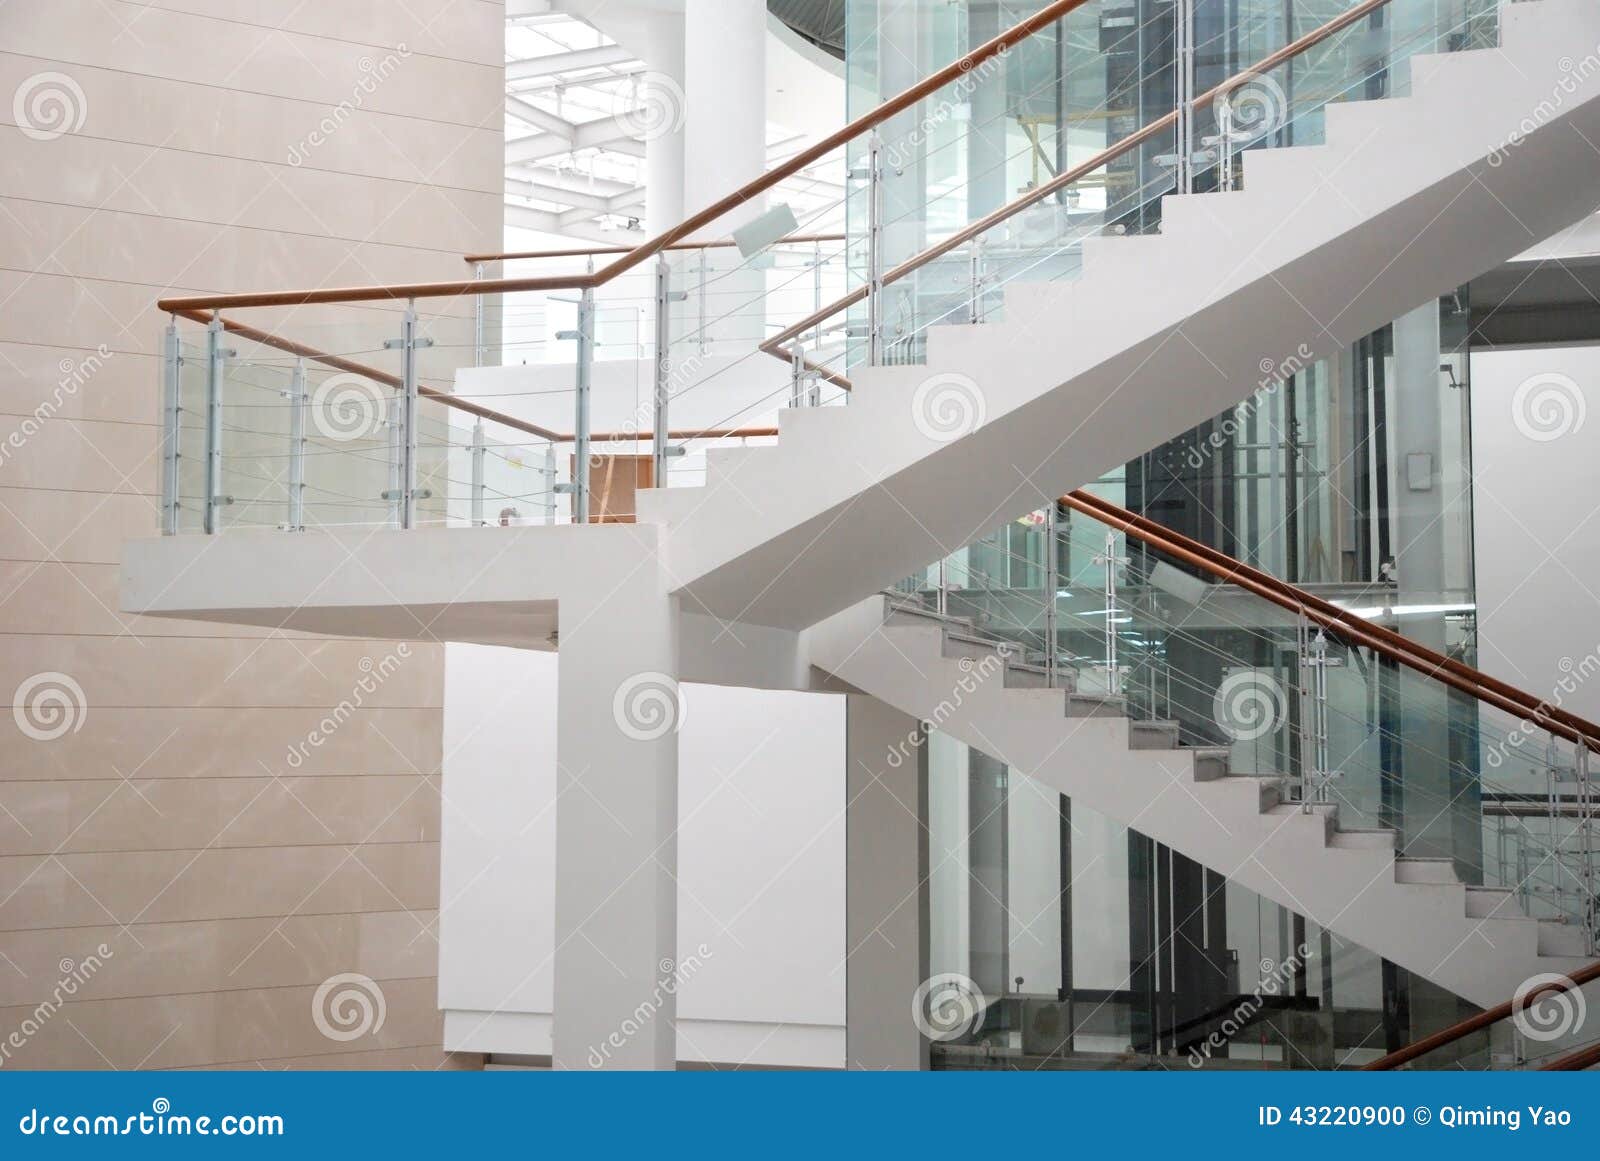 stairs in the building